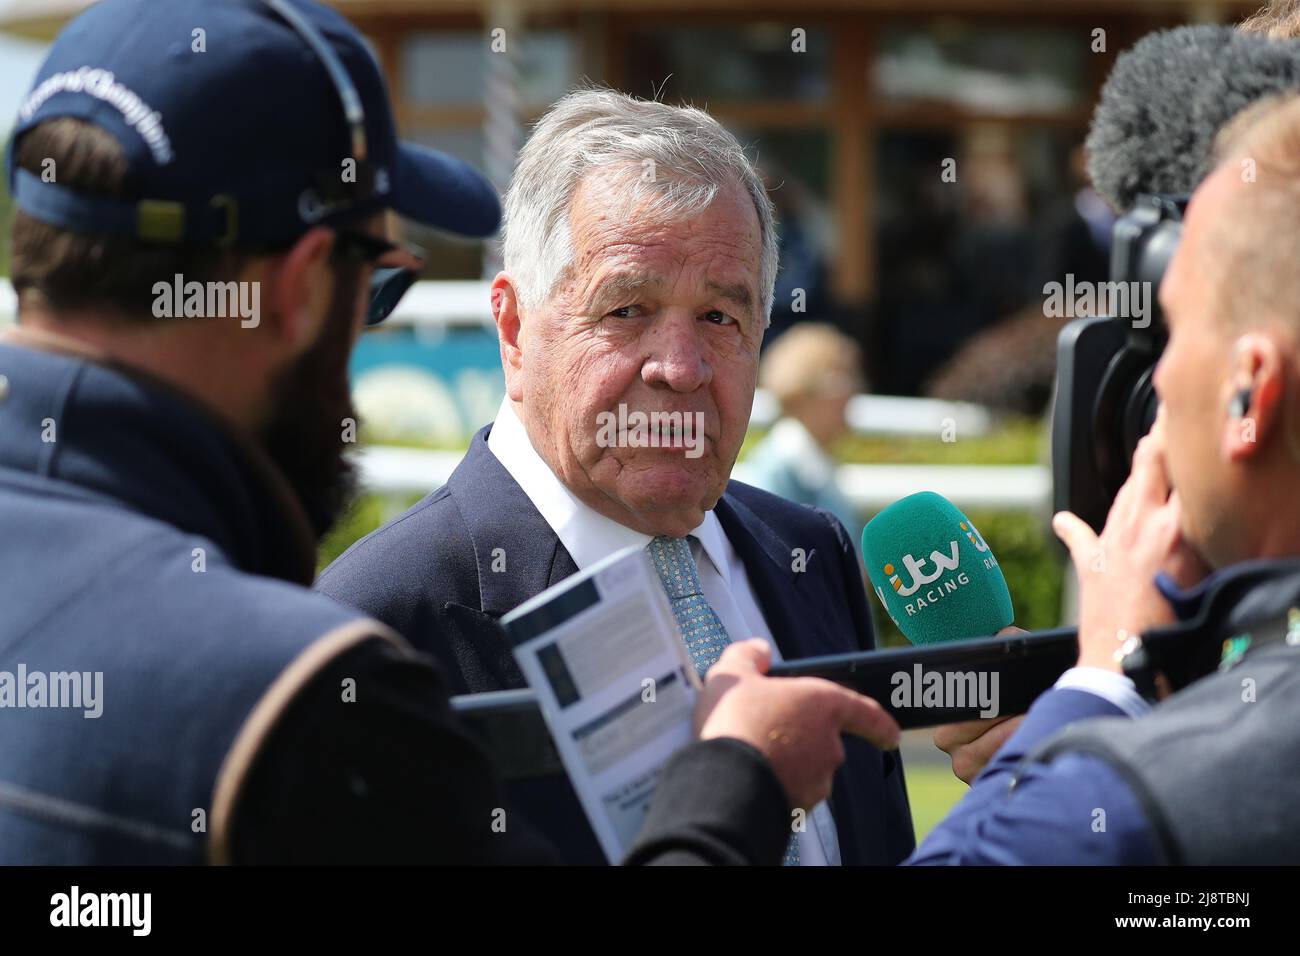 SIR MICHAEL STOUTE, RACE HORSE TRAINER, 2022 Stock Photo